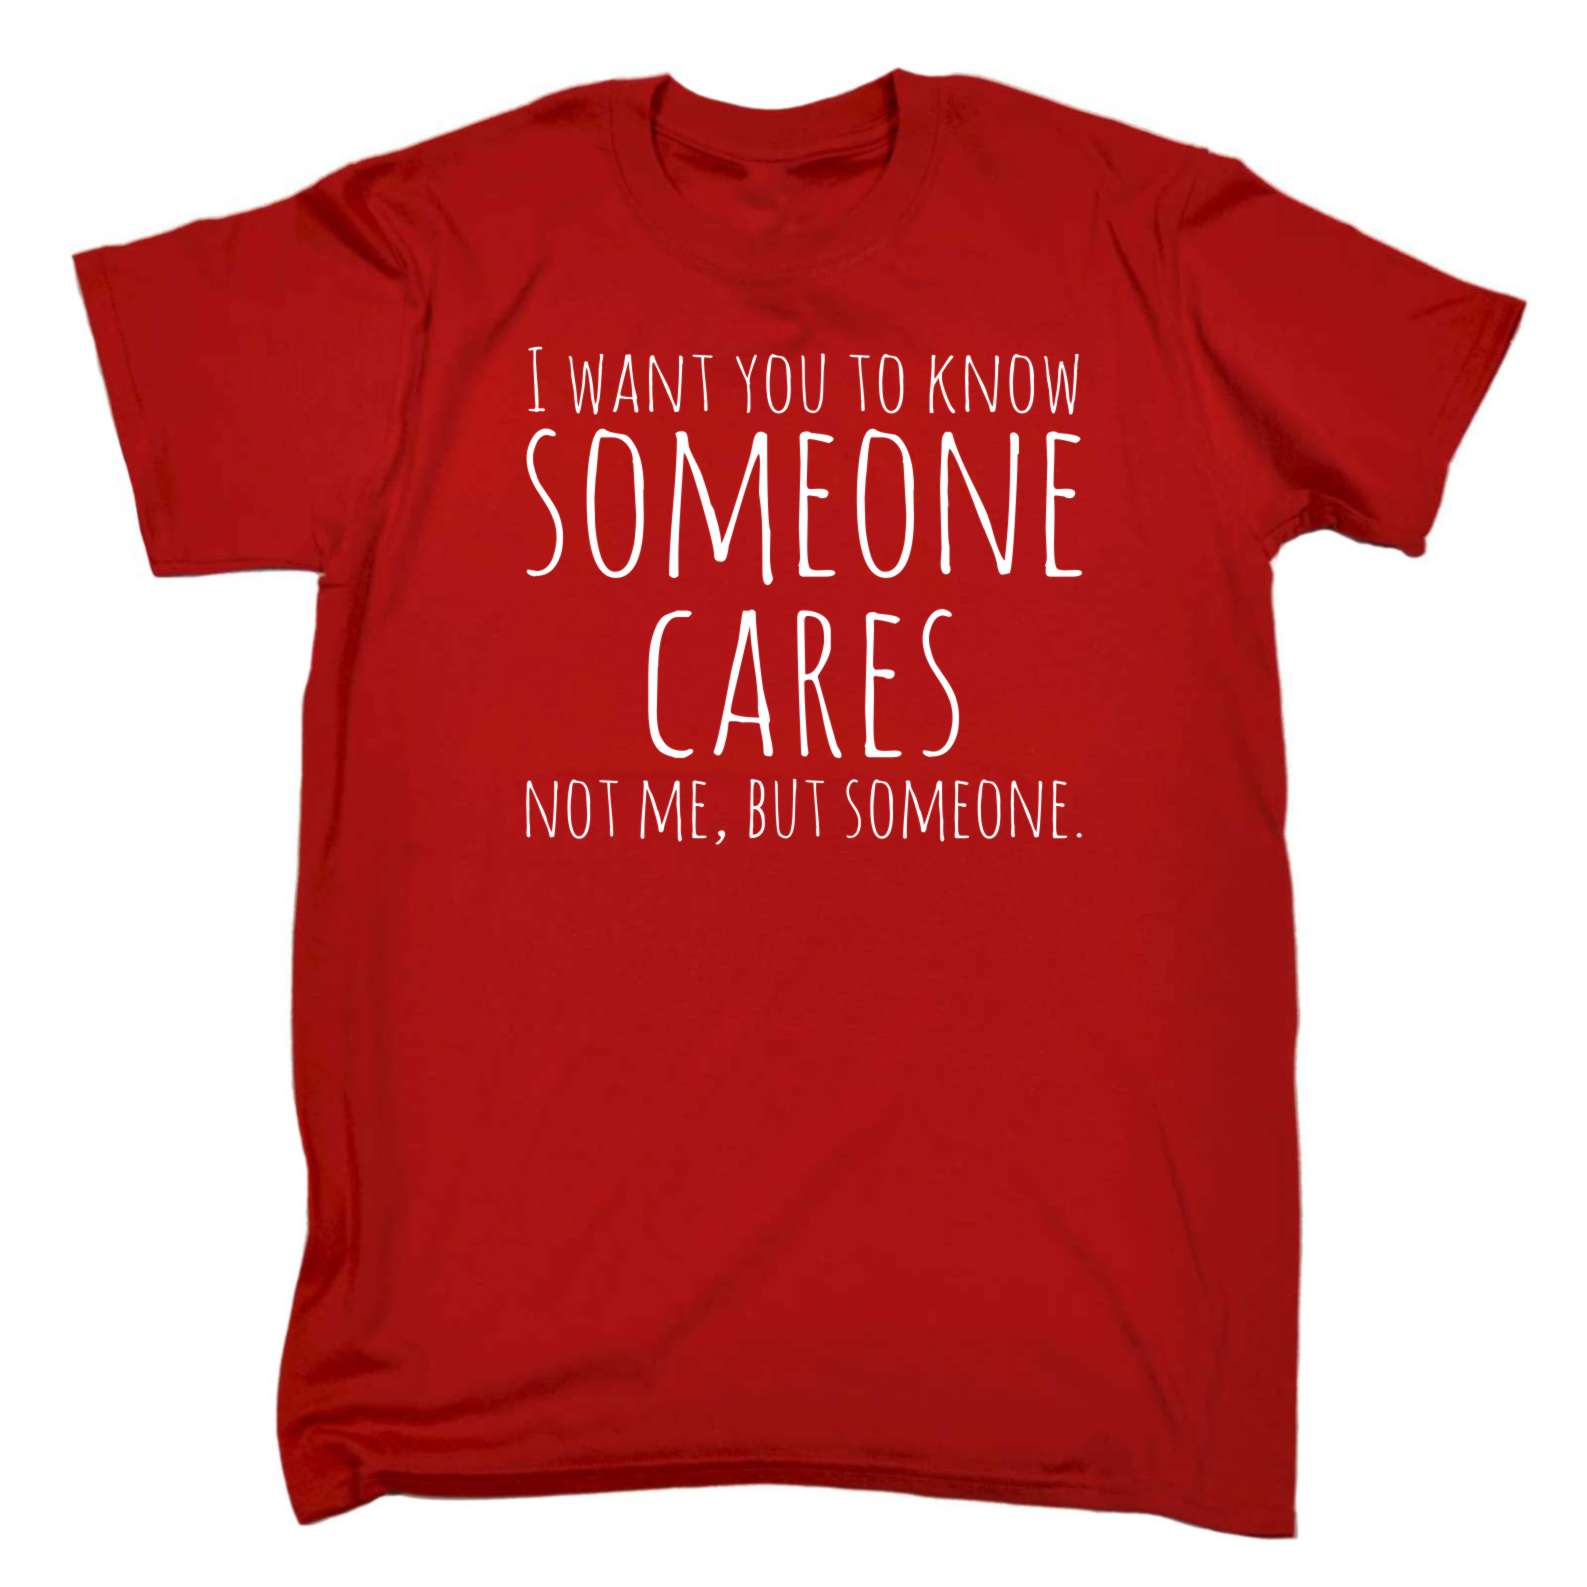 I Want You To Know That Some One Cares Not Me But Someone New Mens Shirt Top Tee 